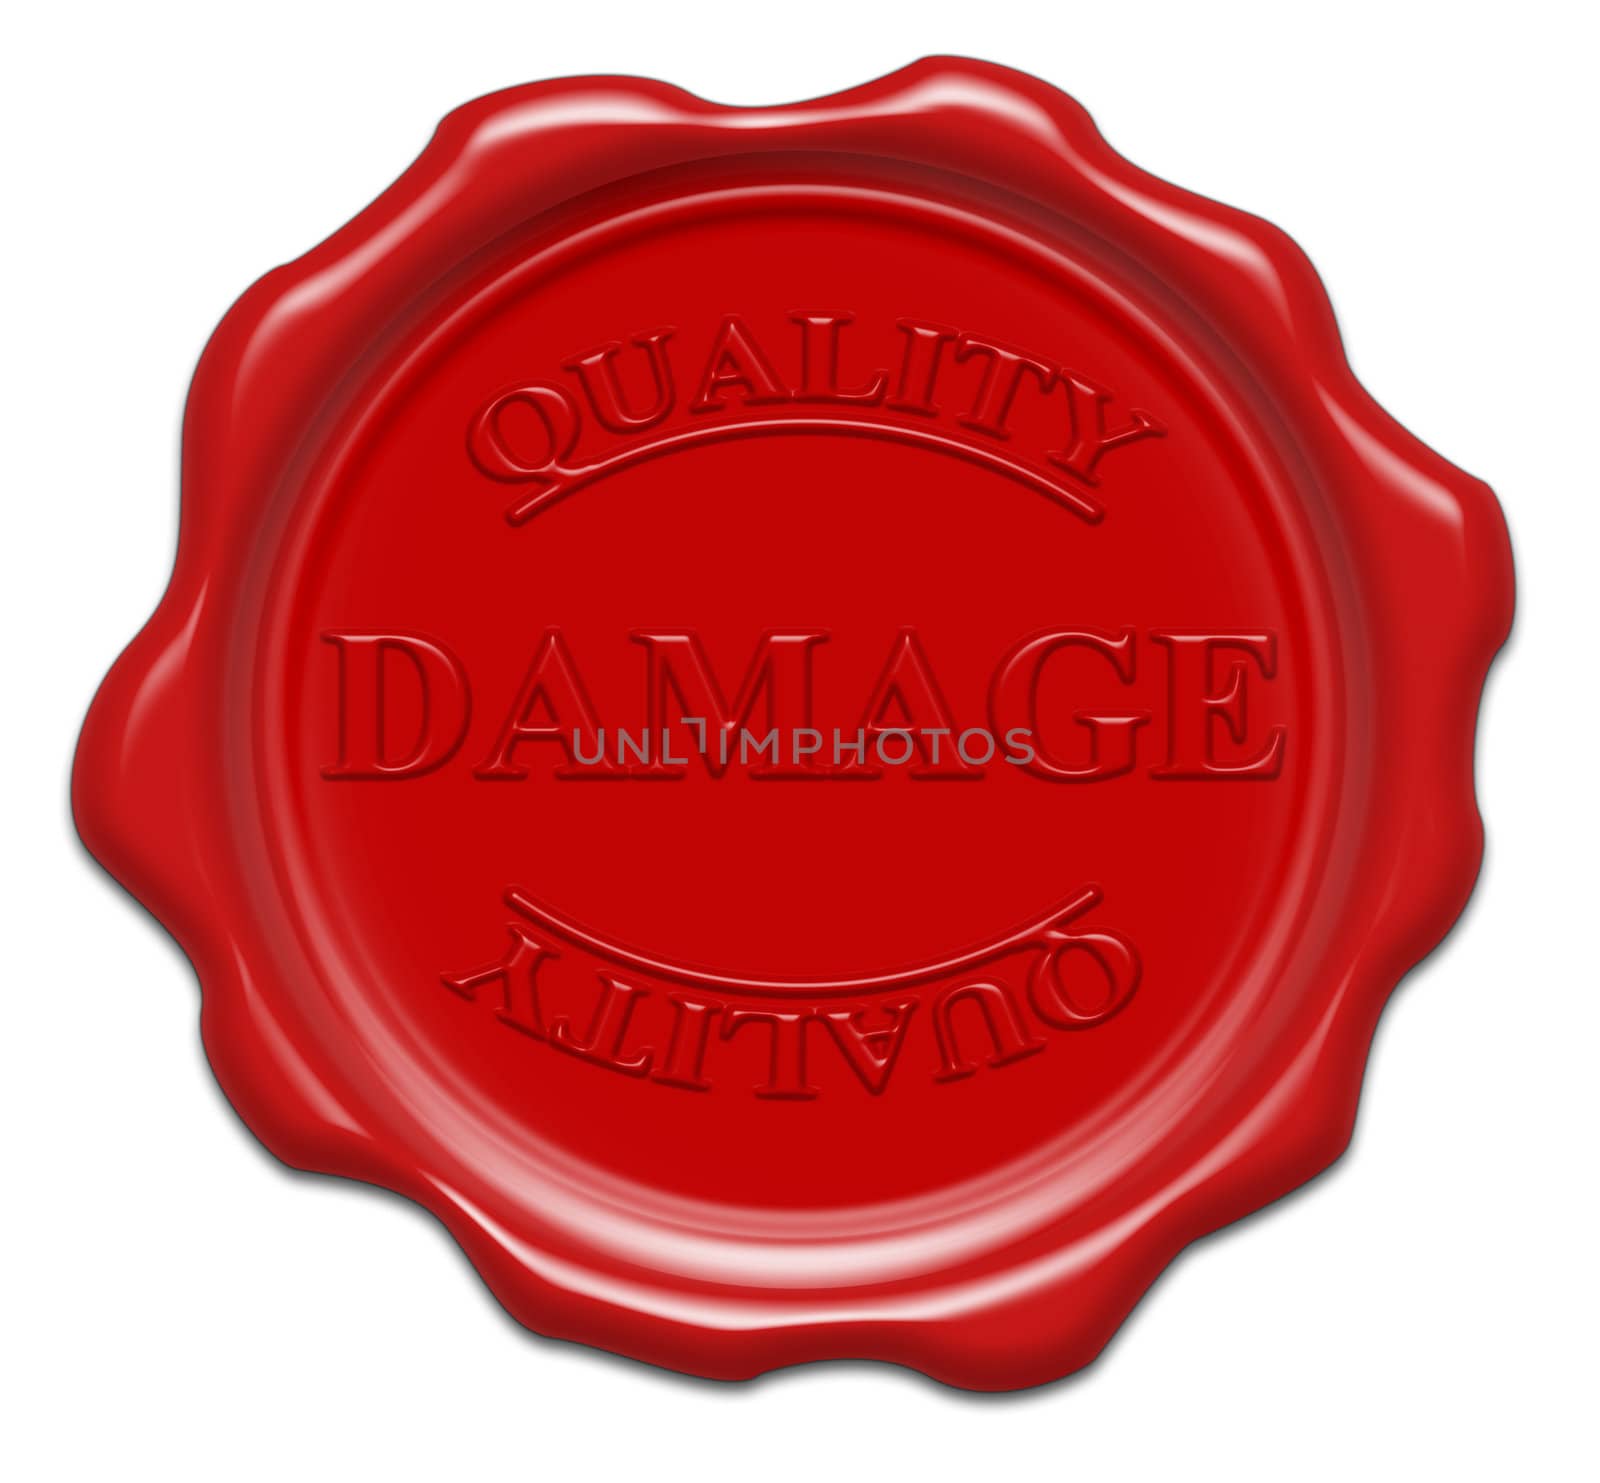 damage quality - illustration red wax seal isolated on white background with word : damage